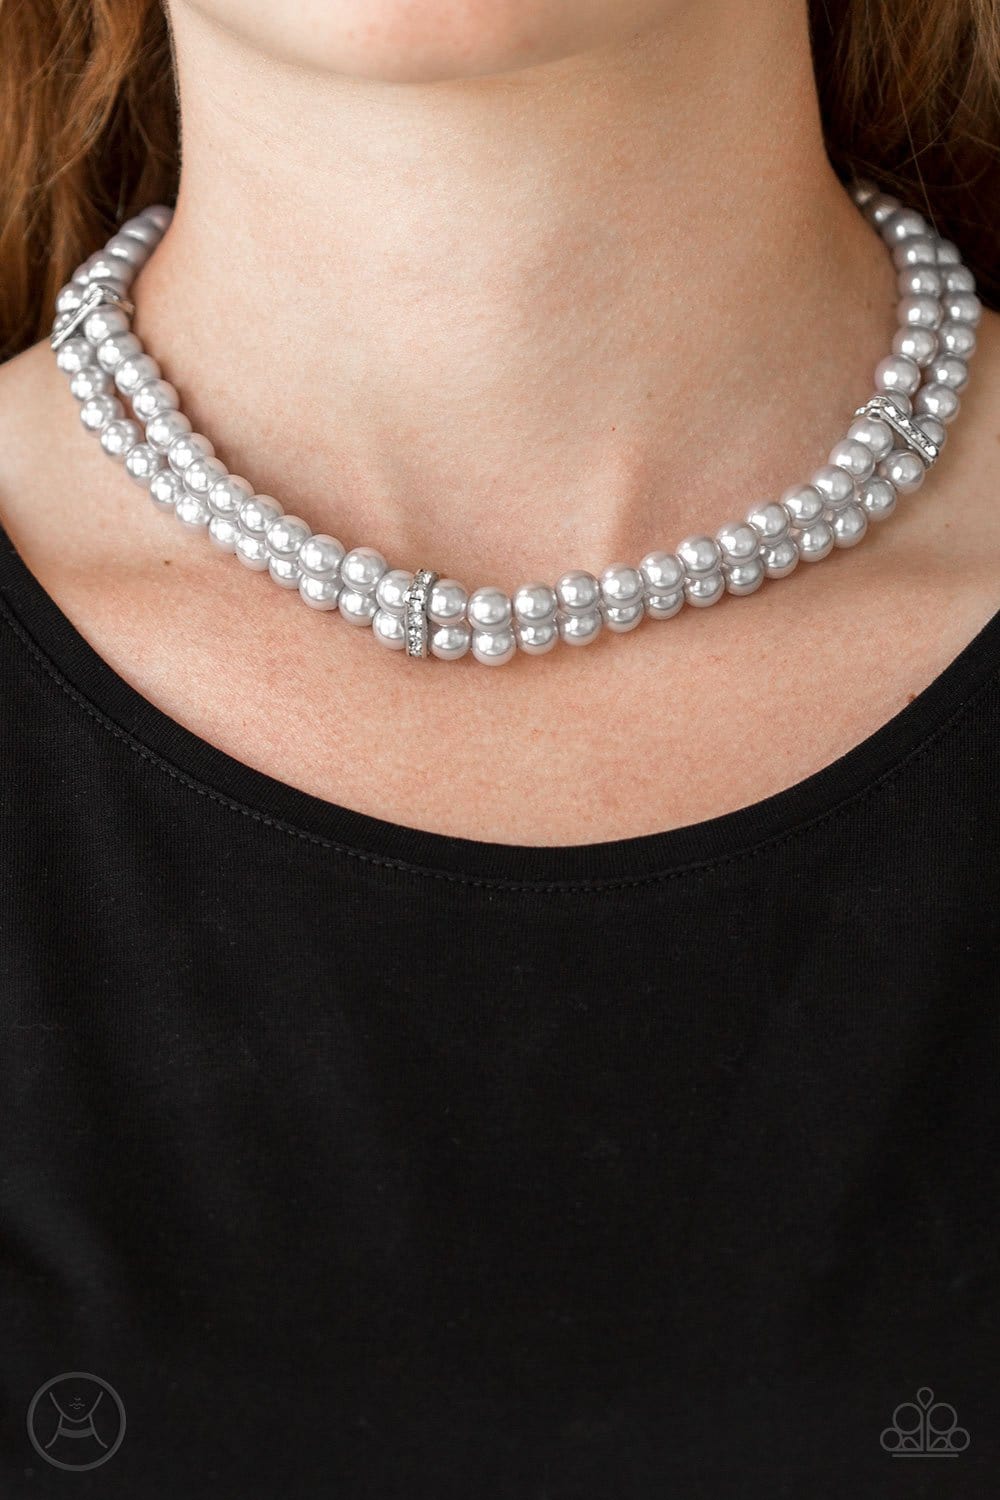 Paparazzi Accessories: Put On Your Party Dress - Silver Pearl/Rhinestone Choker - Jewels N Thingz Boutique